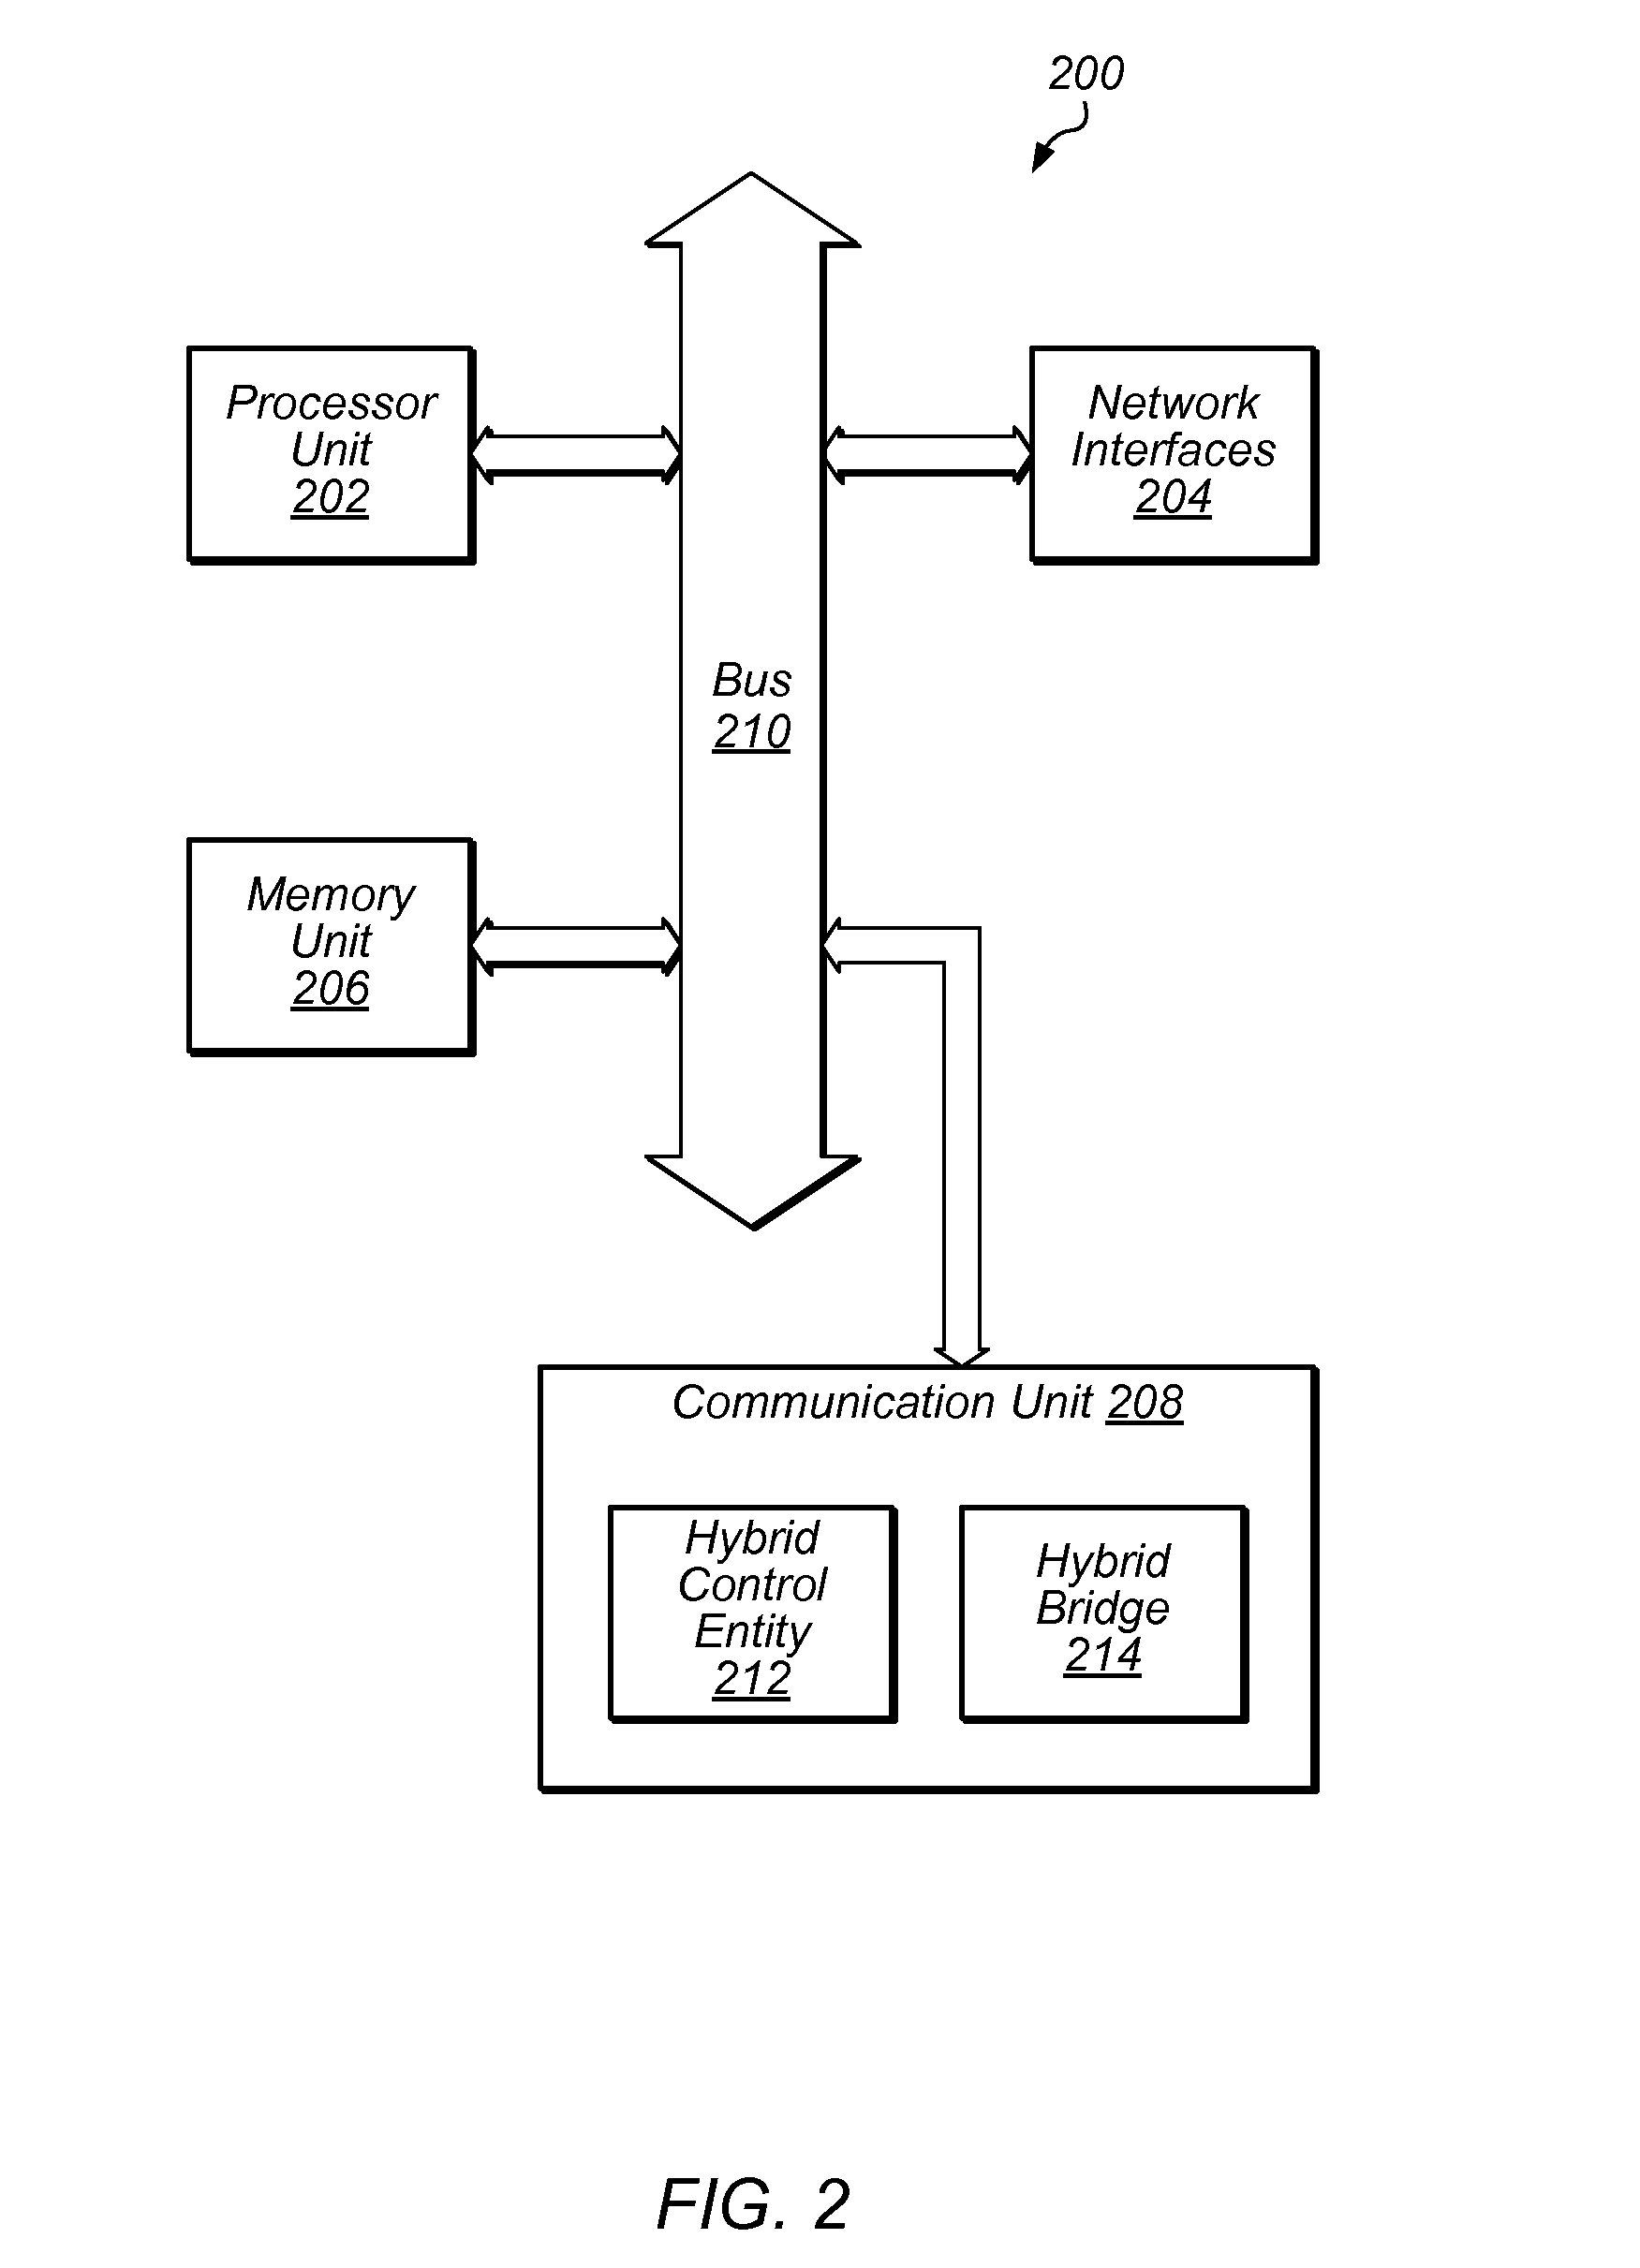 Packet-Based Aggregation of Data Streams Across Disparate Networking Interfaces While Providing Robust Reaction to Dynamic Network Interference With Path Selection and Load Balancing